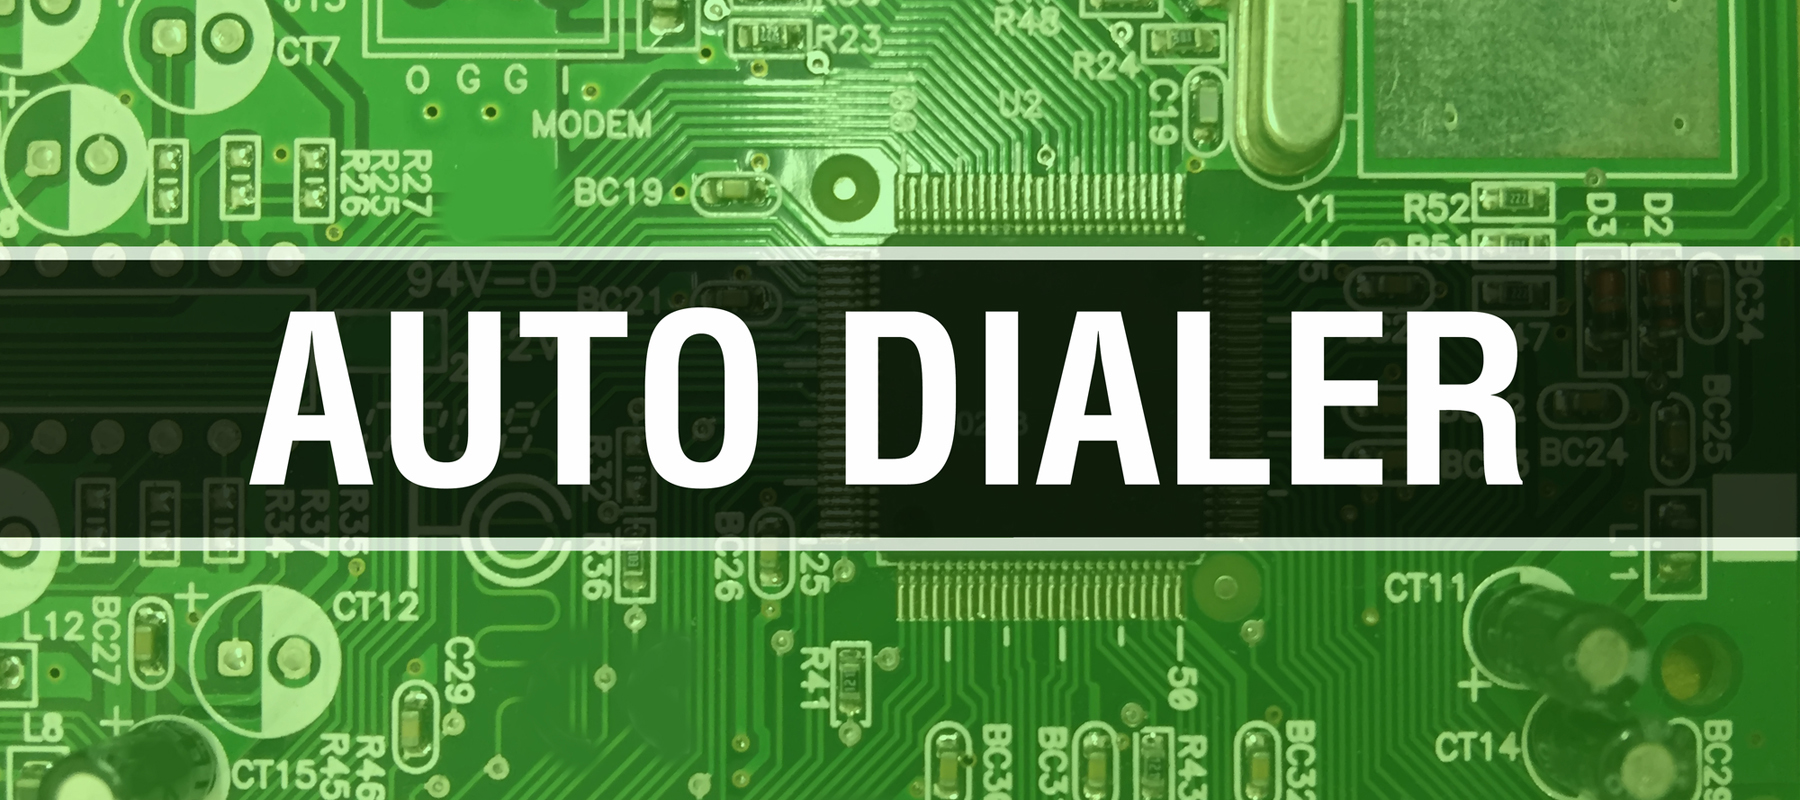 How Much Does an Auto Dialer Cost?